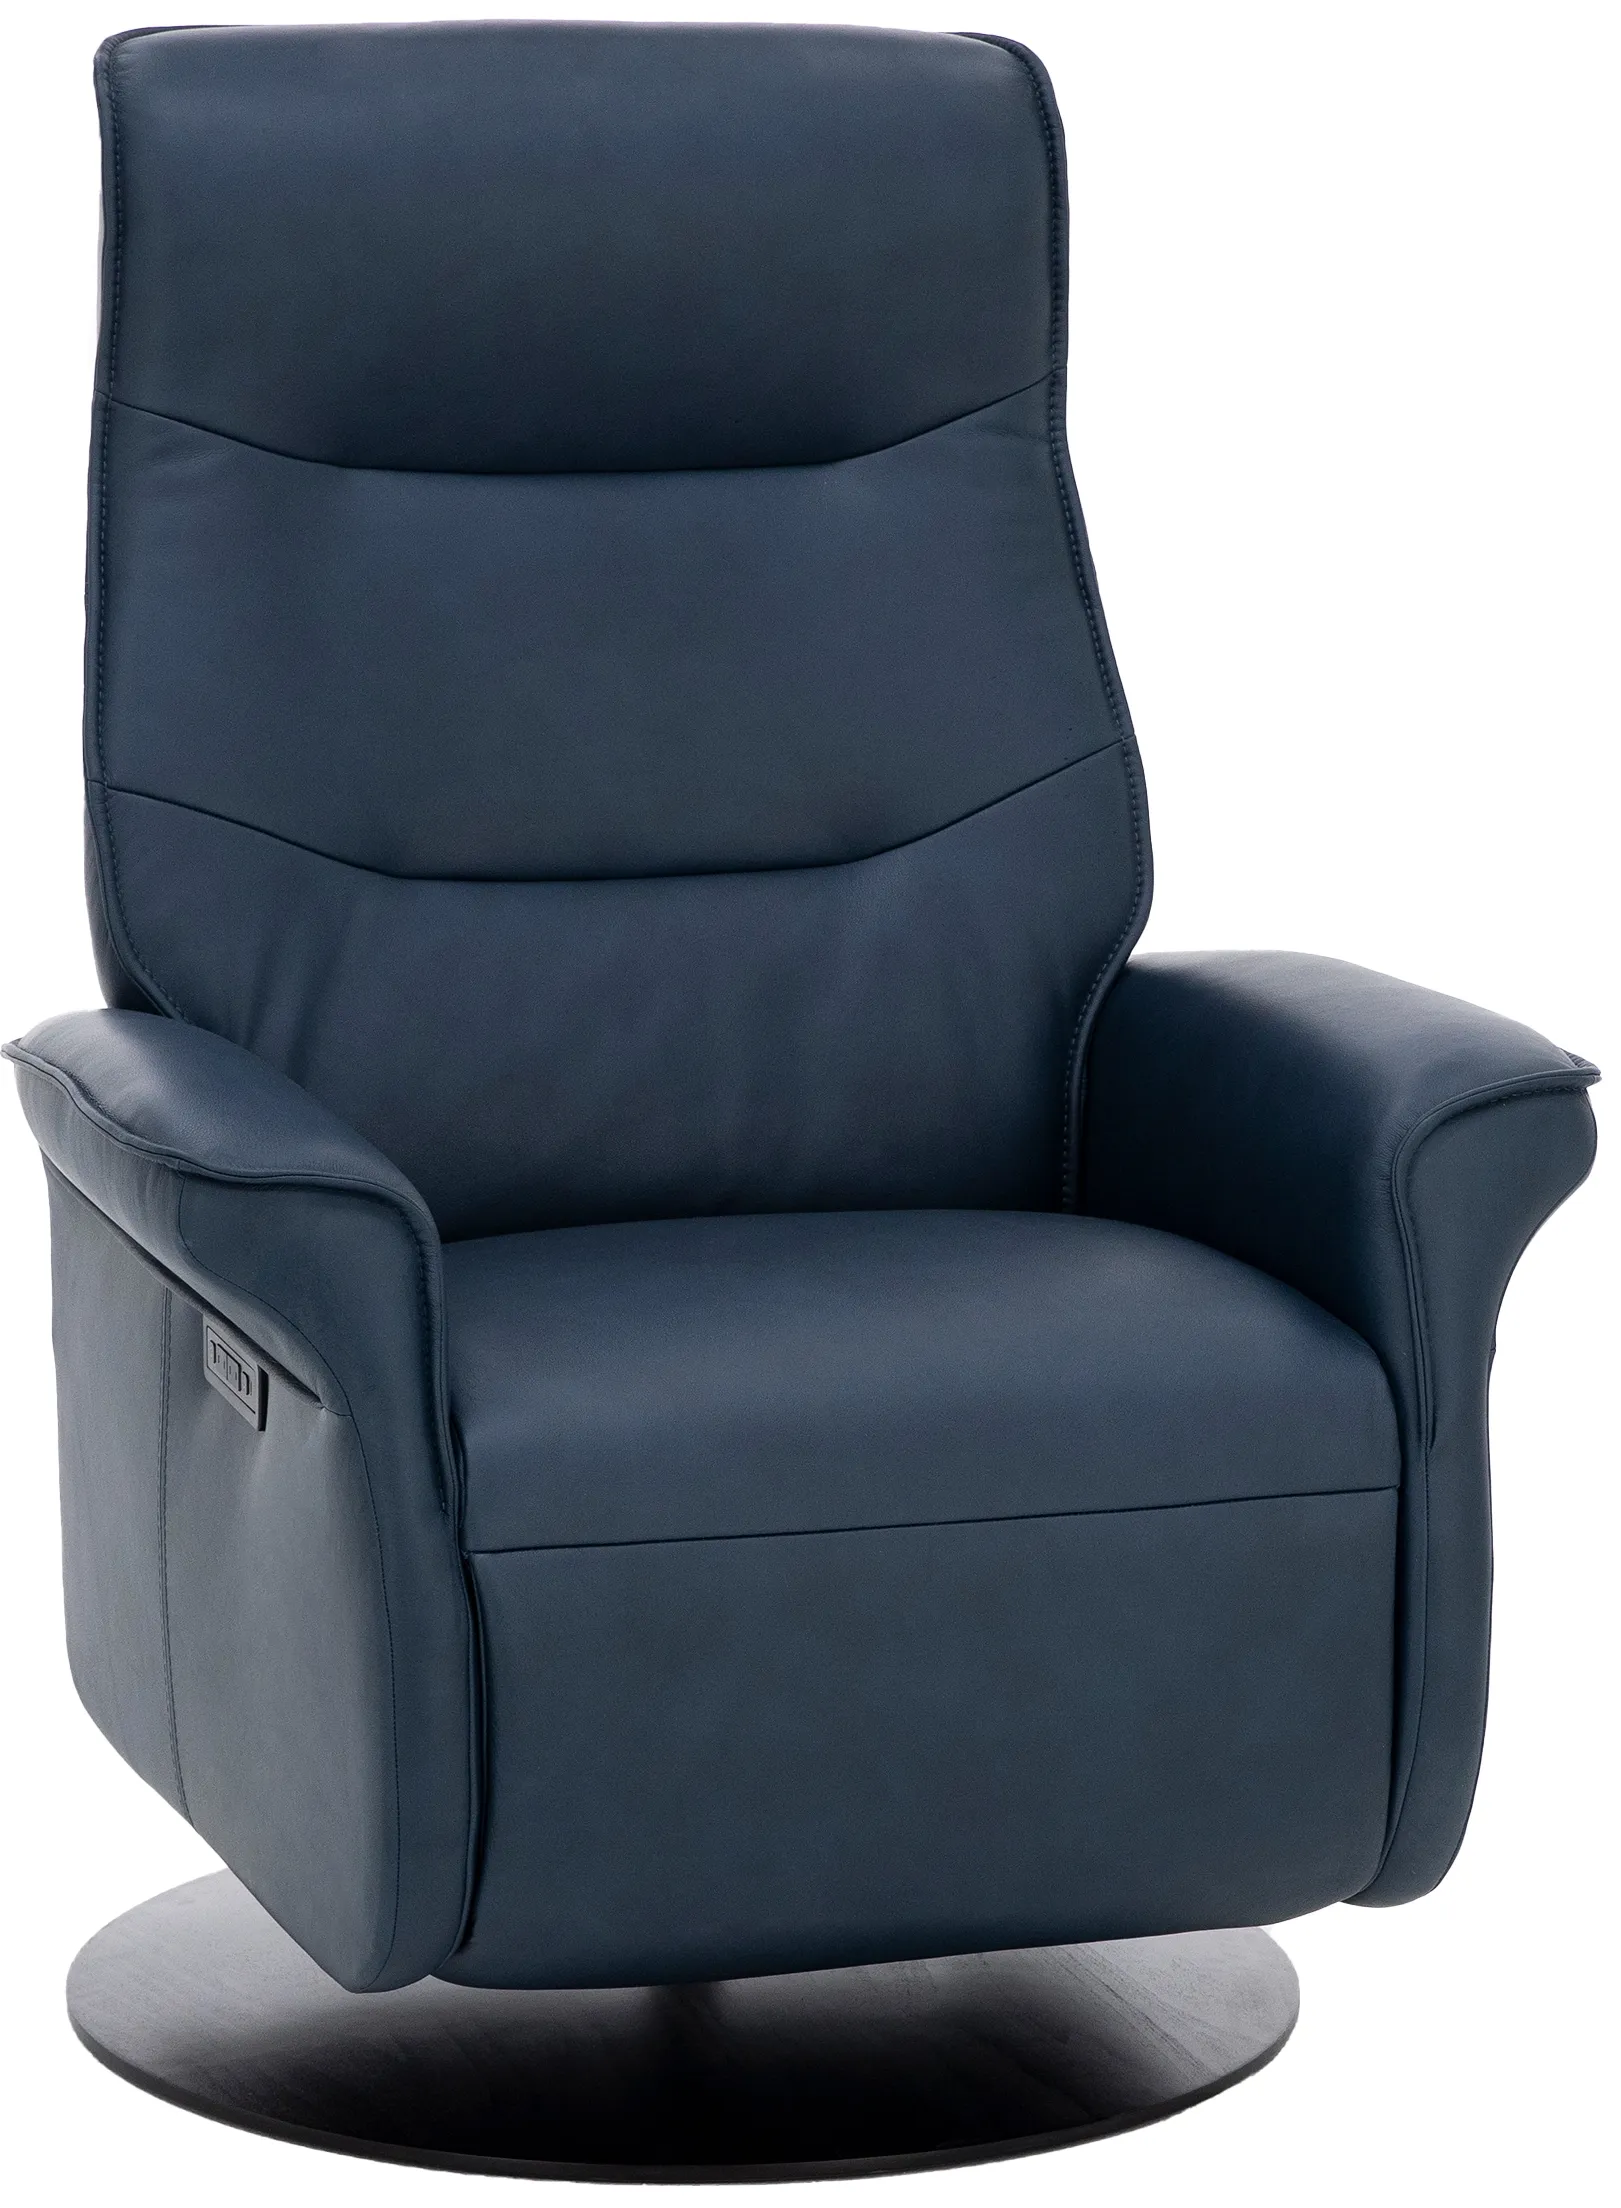 Vianna Leather Large Power Swivel Recliner in Pacific